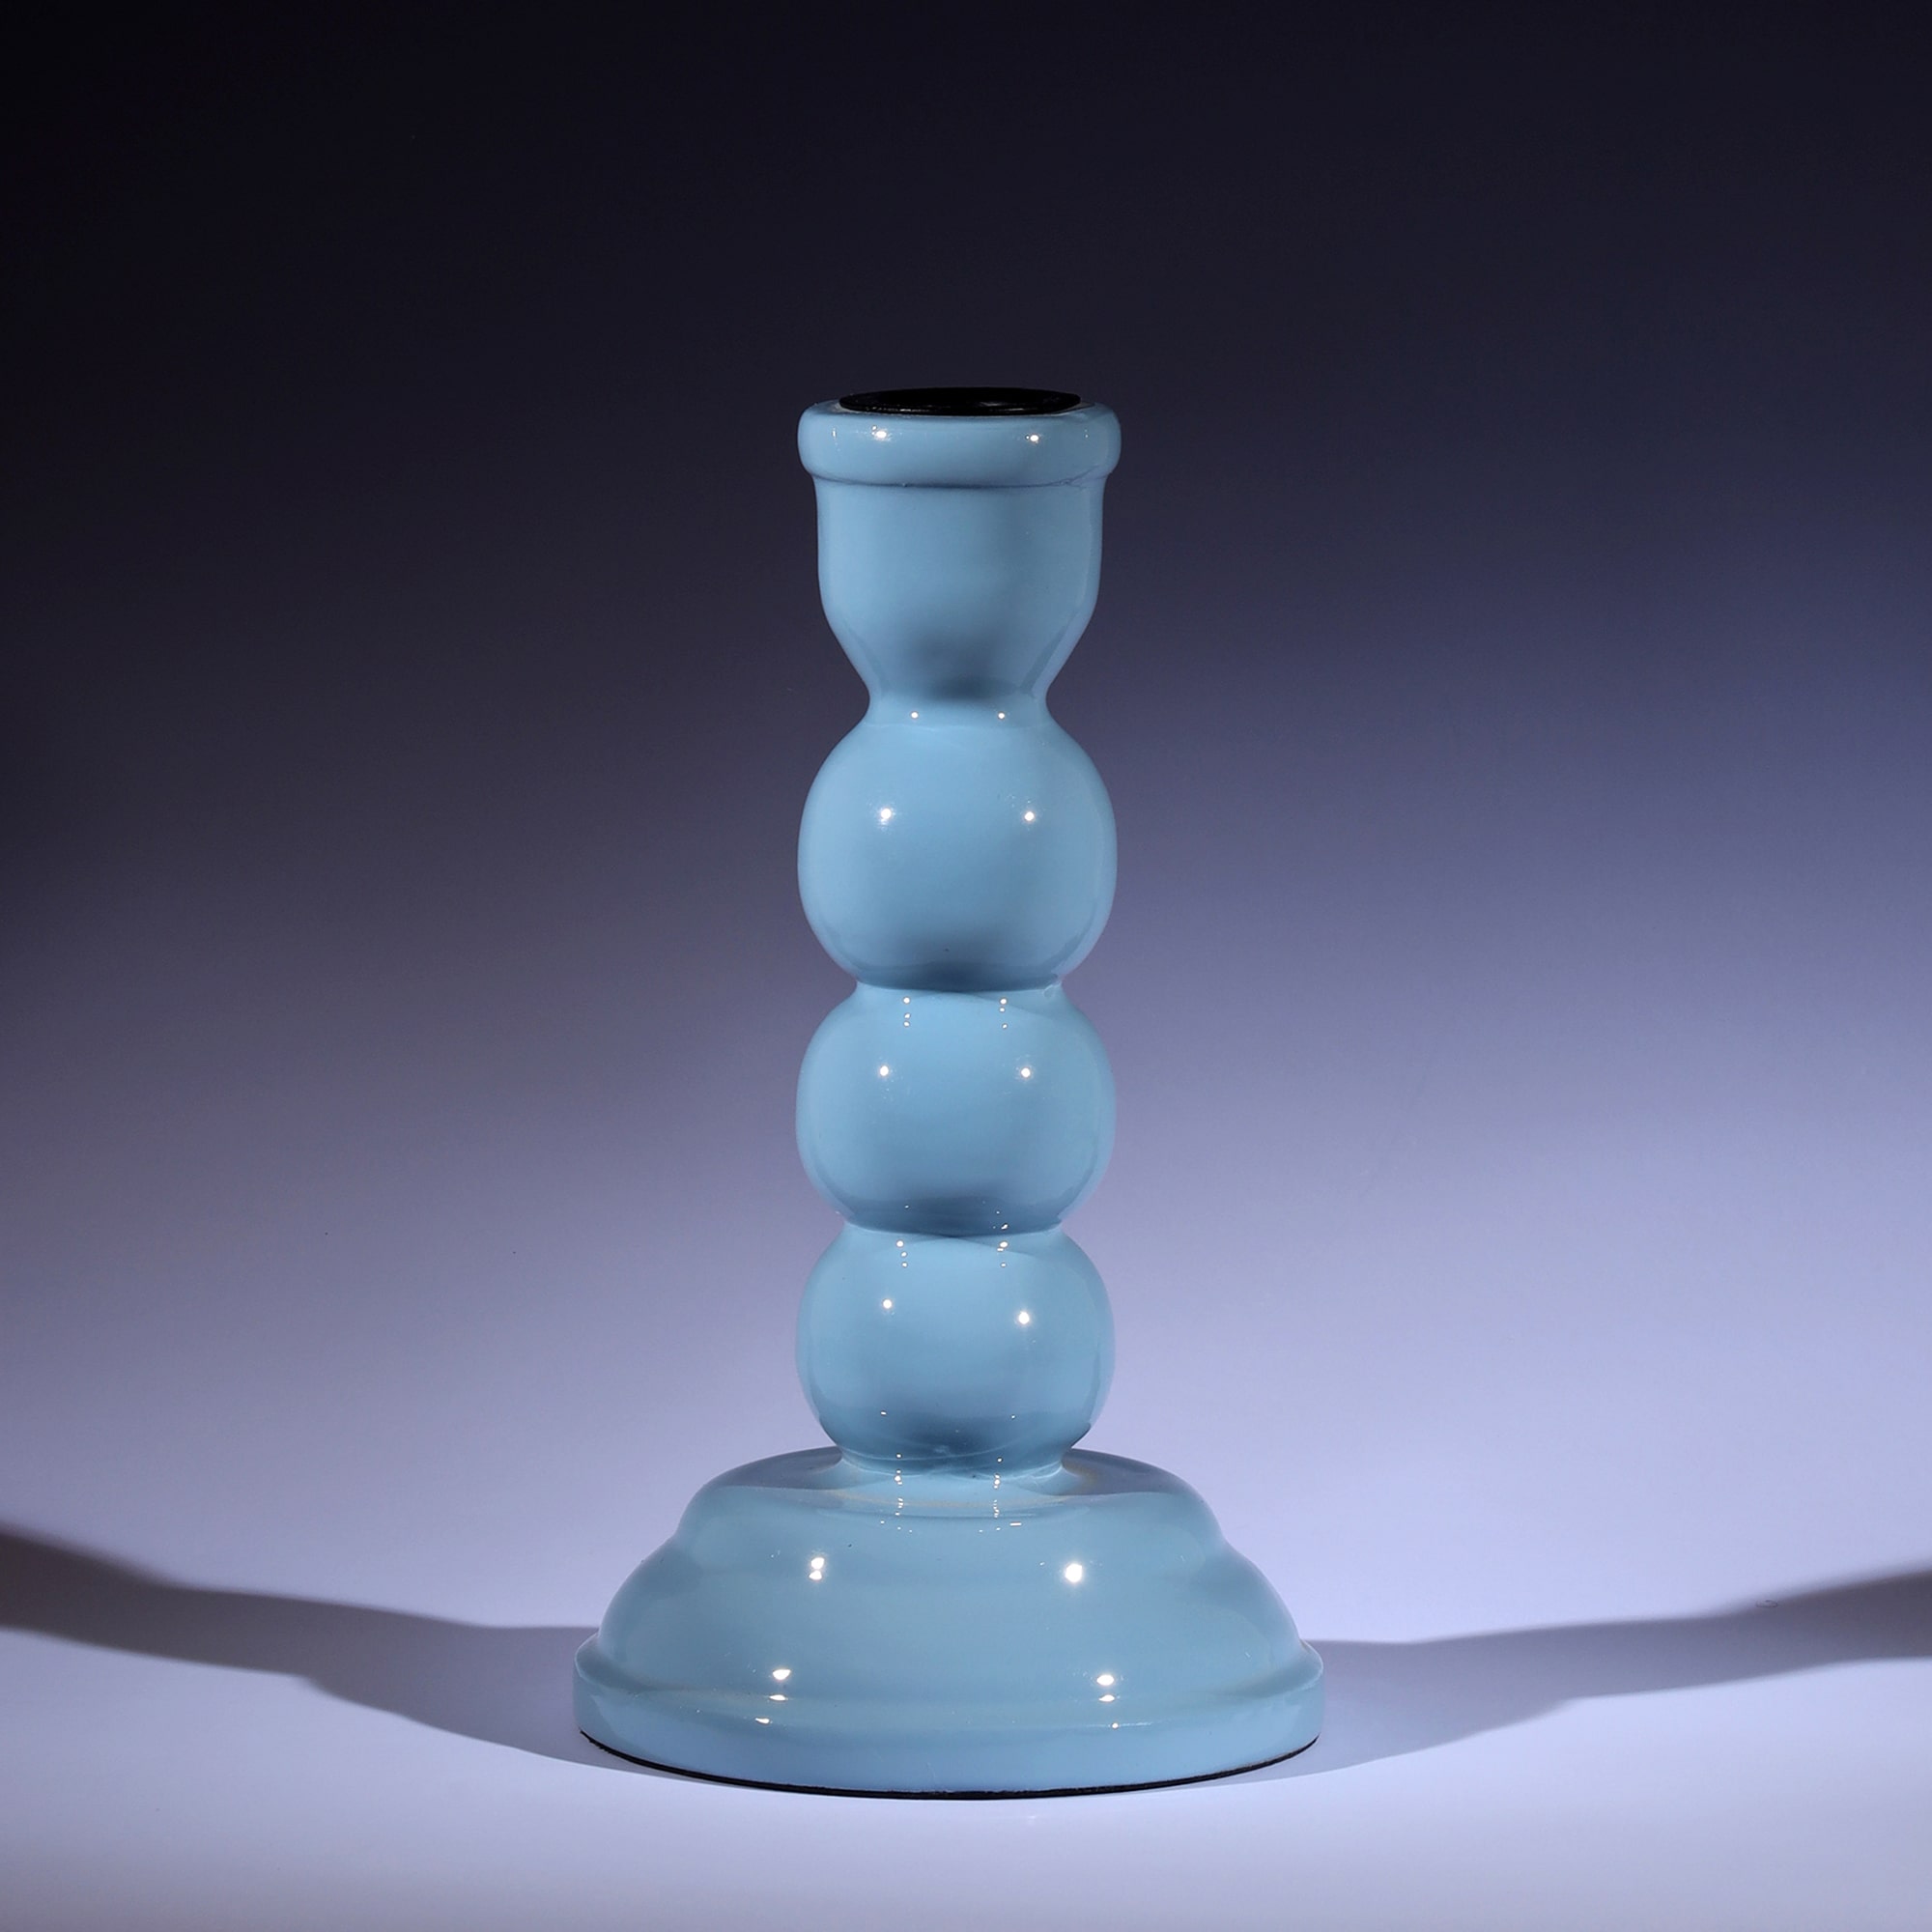 Powder Blue Polished Lacquer Candle holder,it is shaped like three solid circles on top of a tapered base